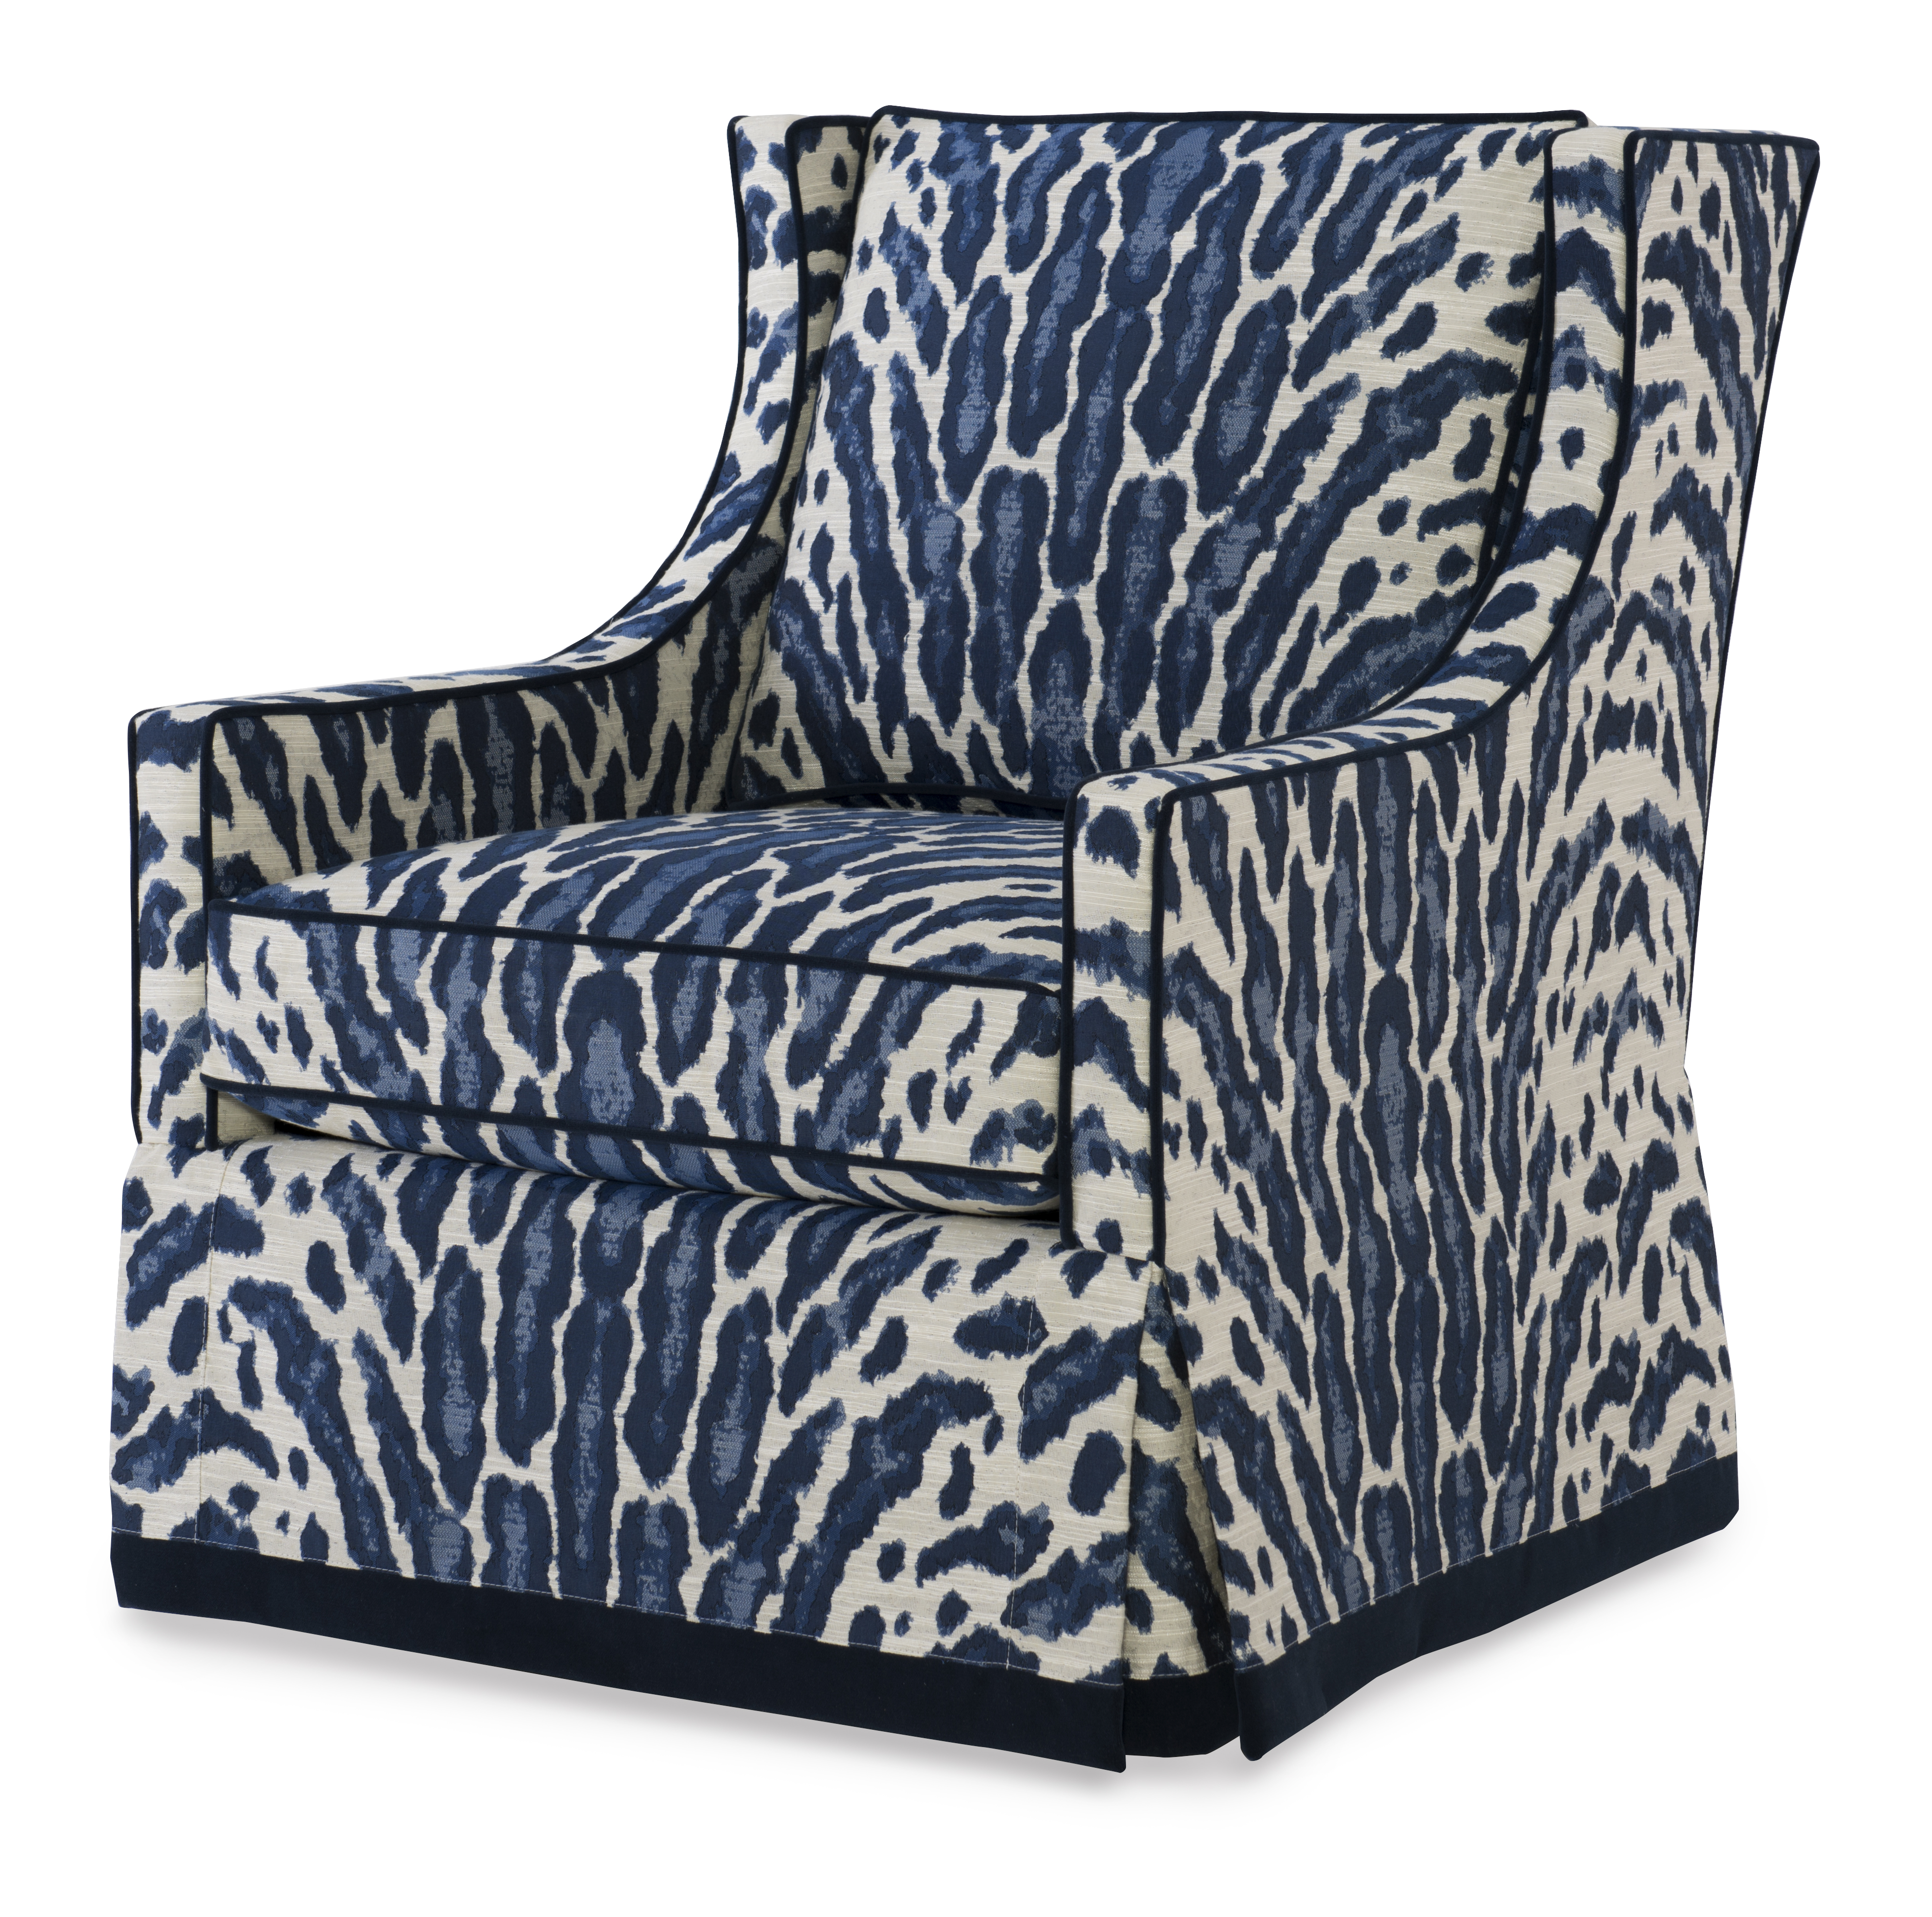 Devon chair with a modern leopard print from Wesley Hall 